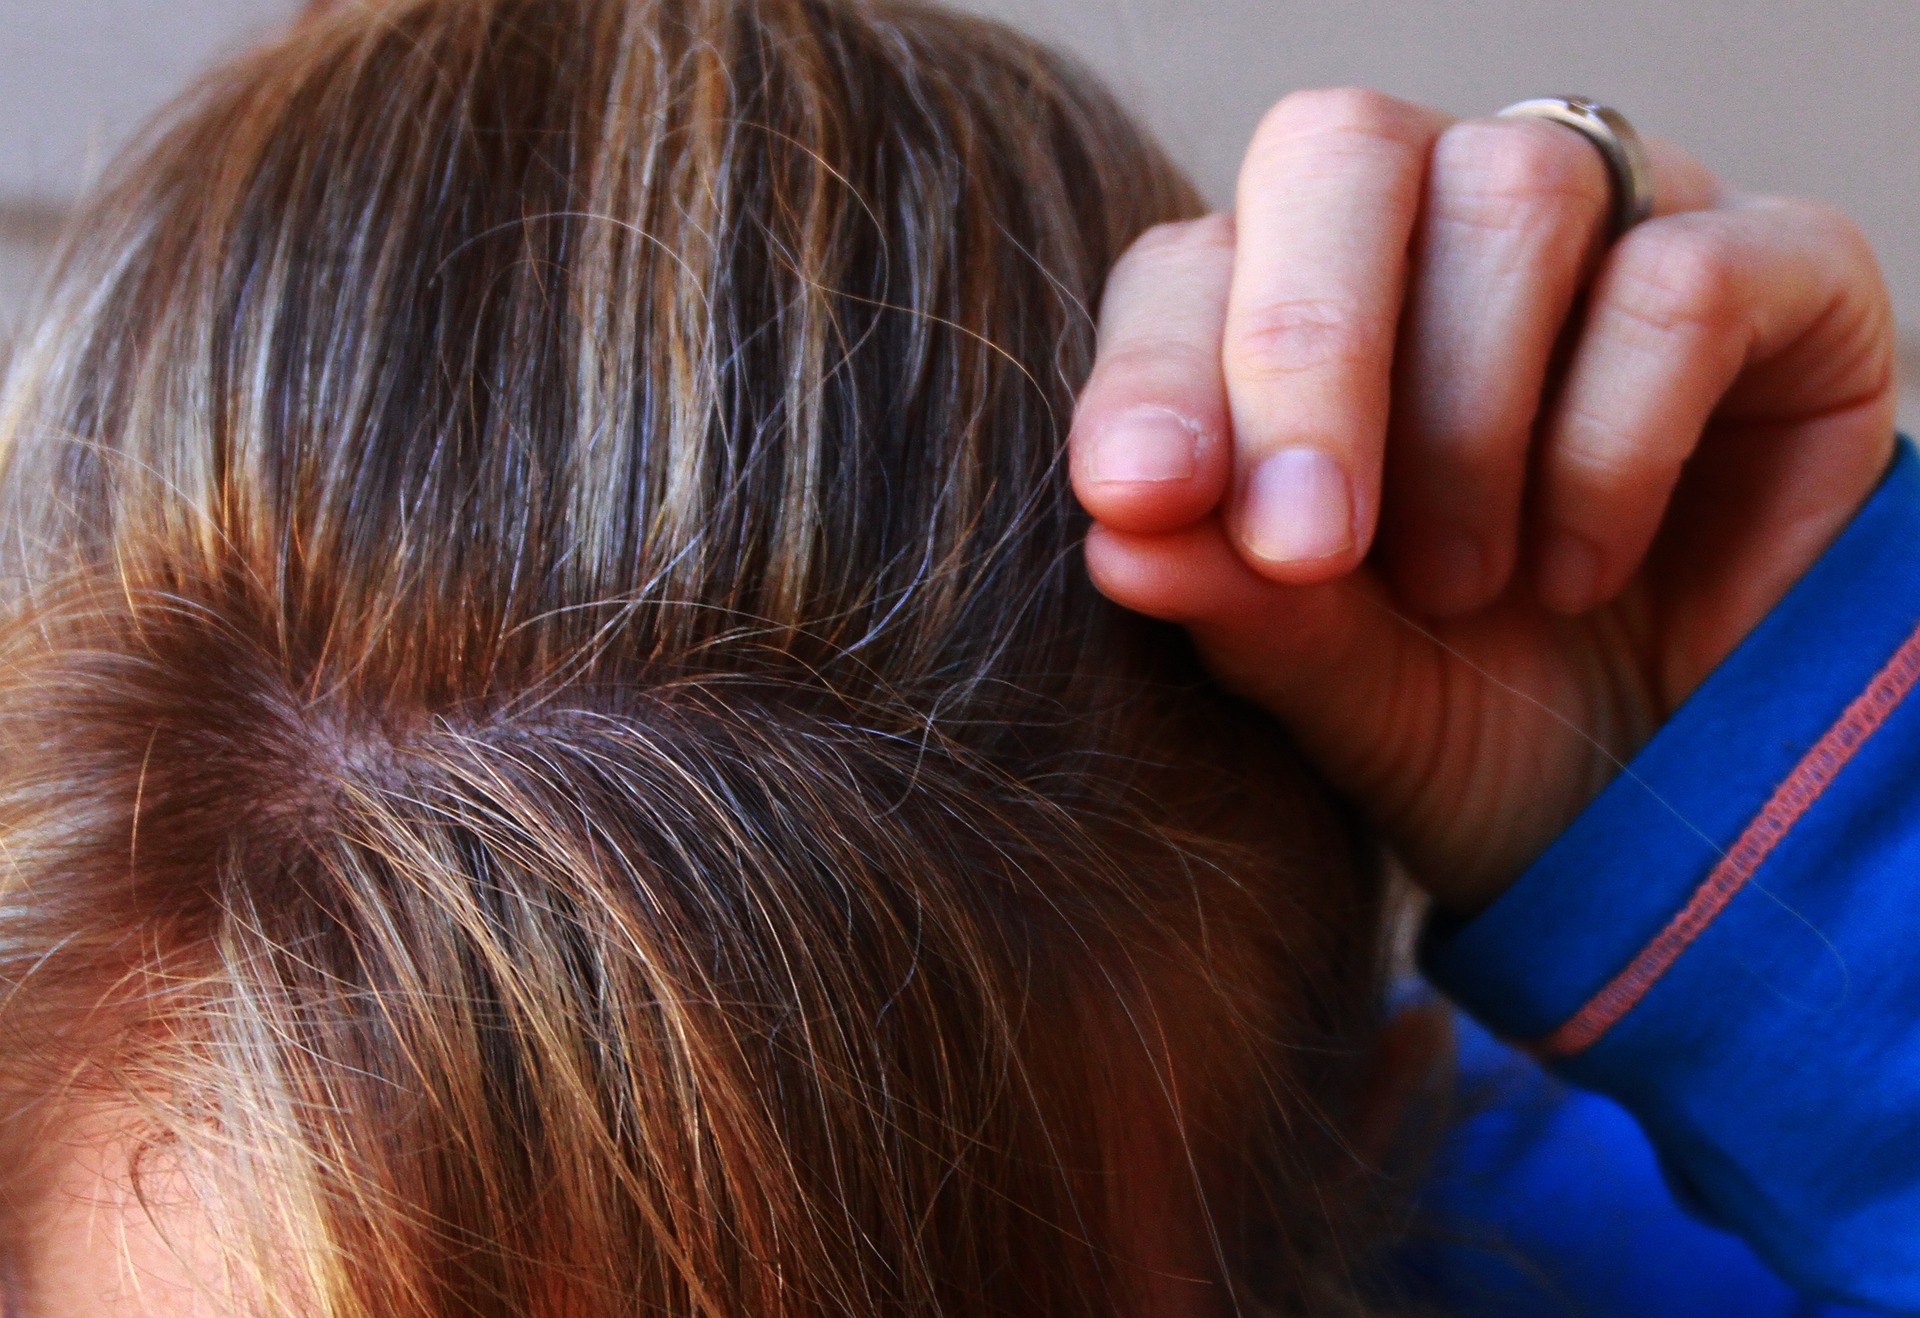 High Stress Hormone Levels In Hair Could Predict Heart Disease, Study Finds